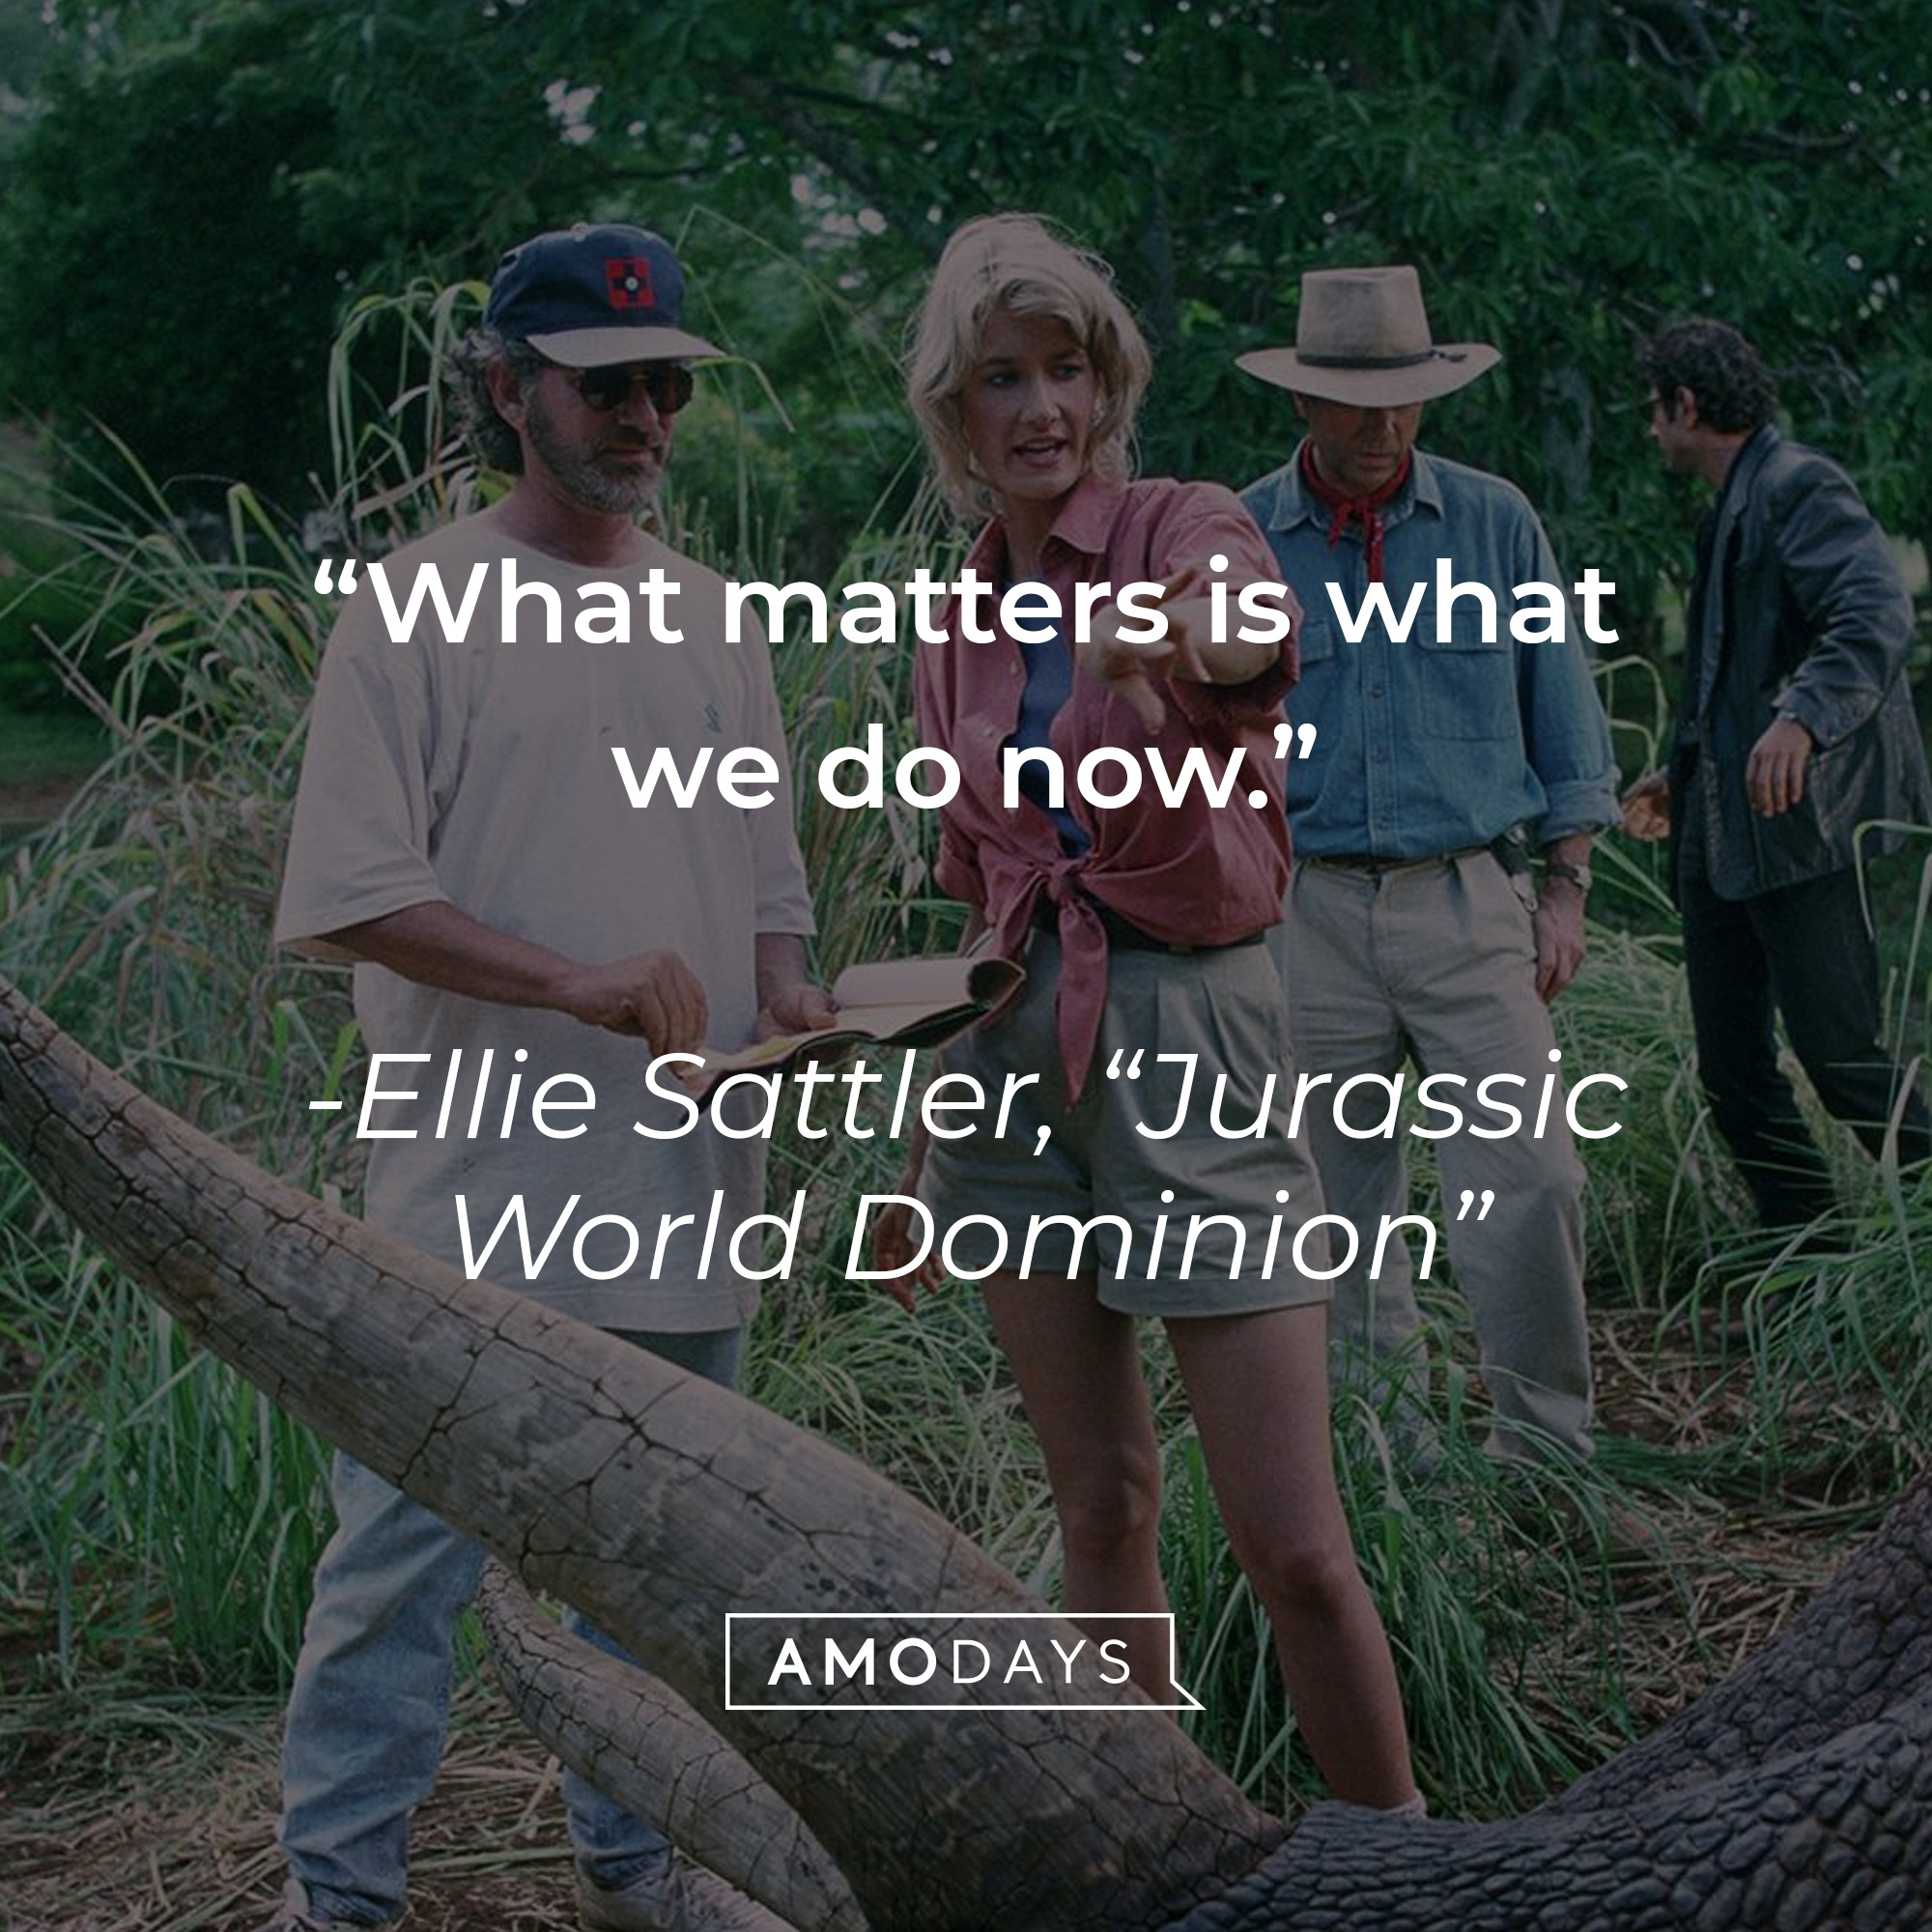 Ellie Sattler's quote: "What matters is what we do now." | Source: facebook.com/JurassicWorld